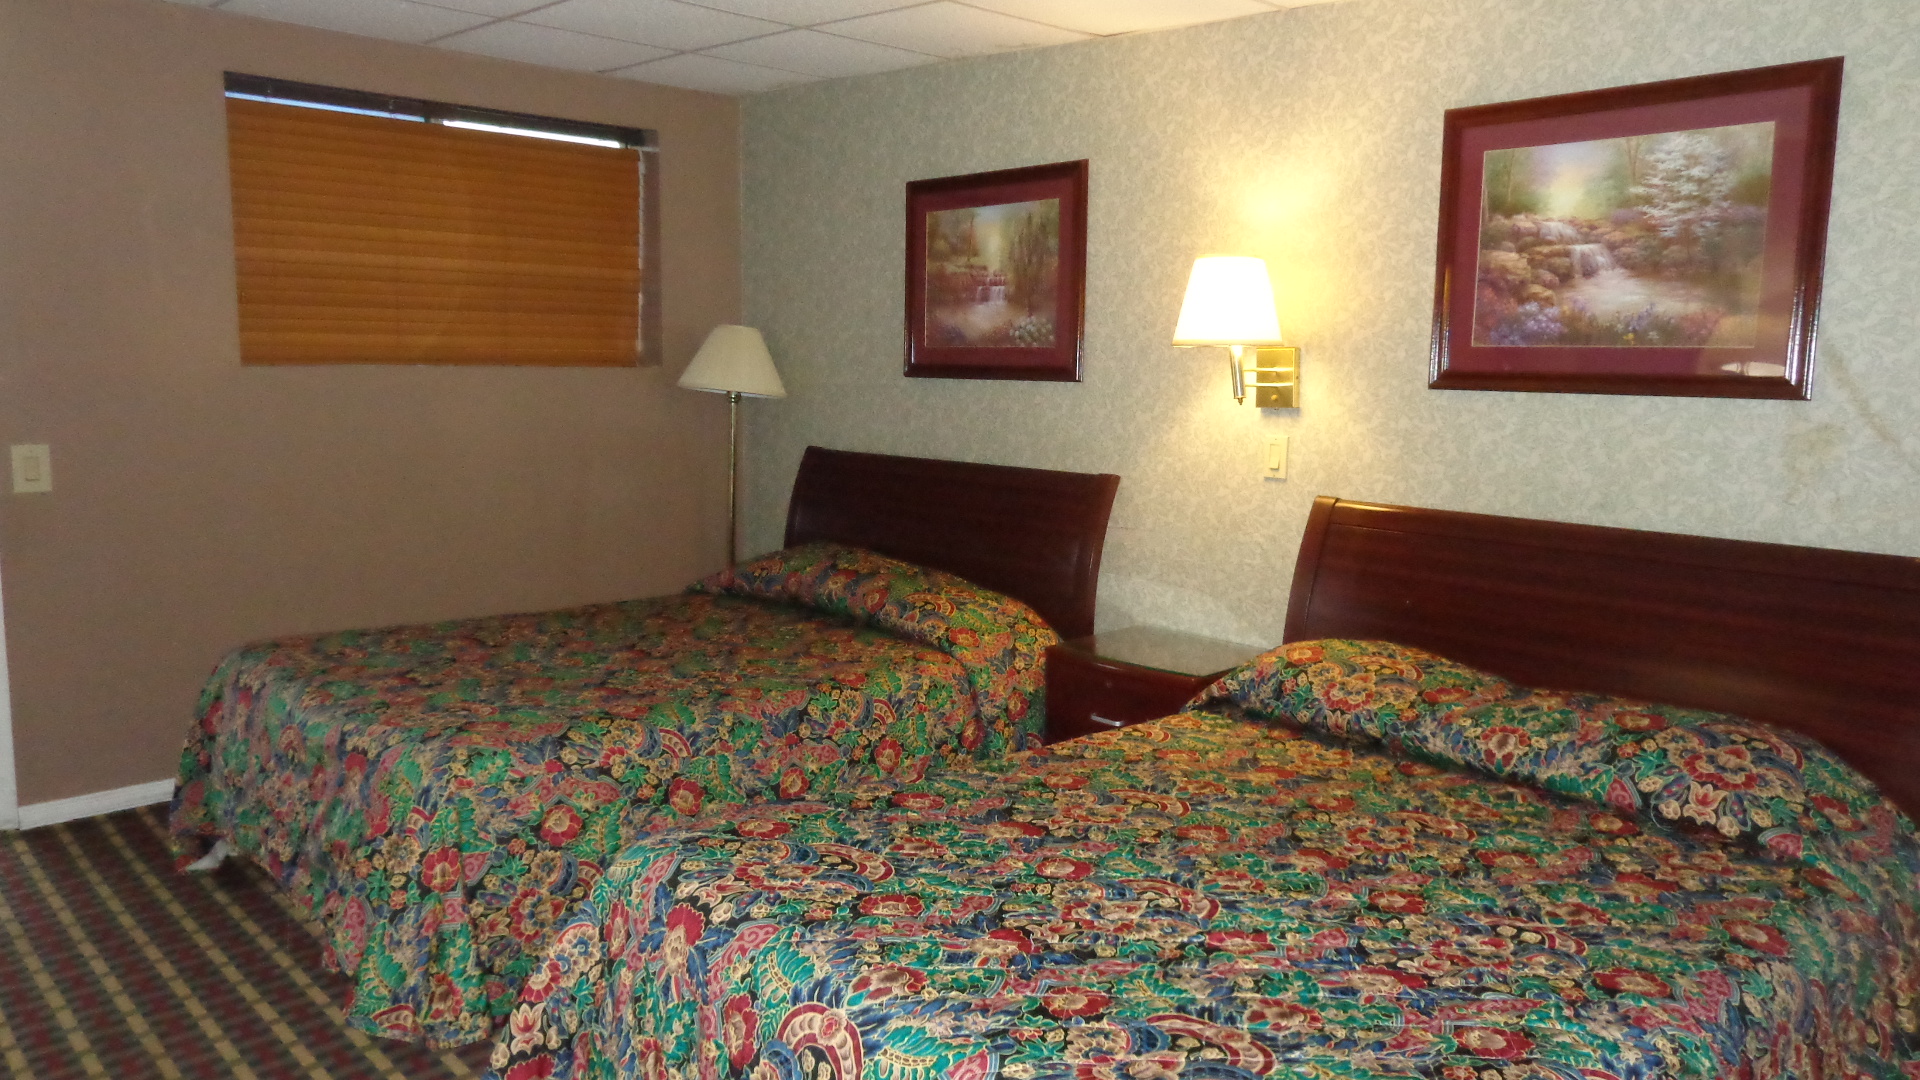 Double Bed Room at Edgewood Motel in NY